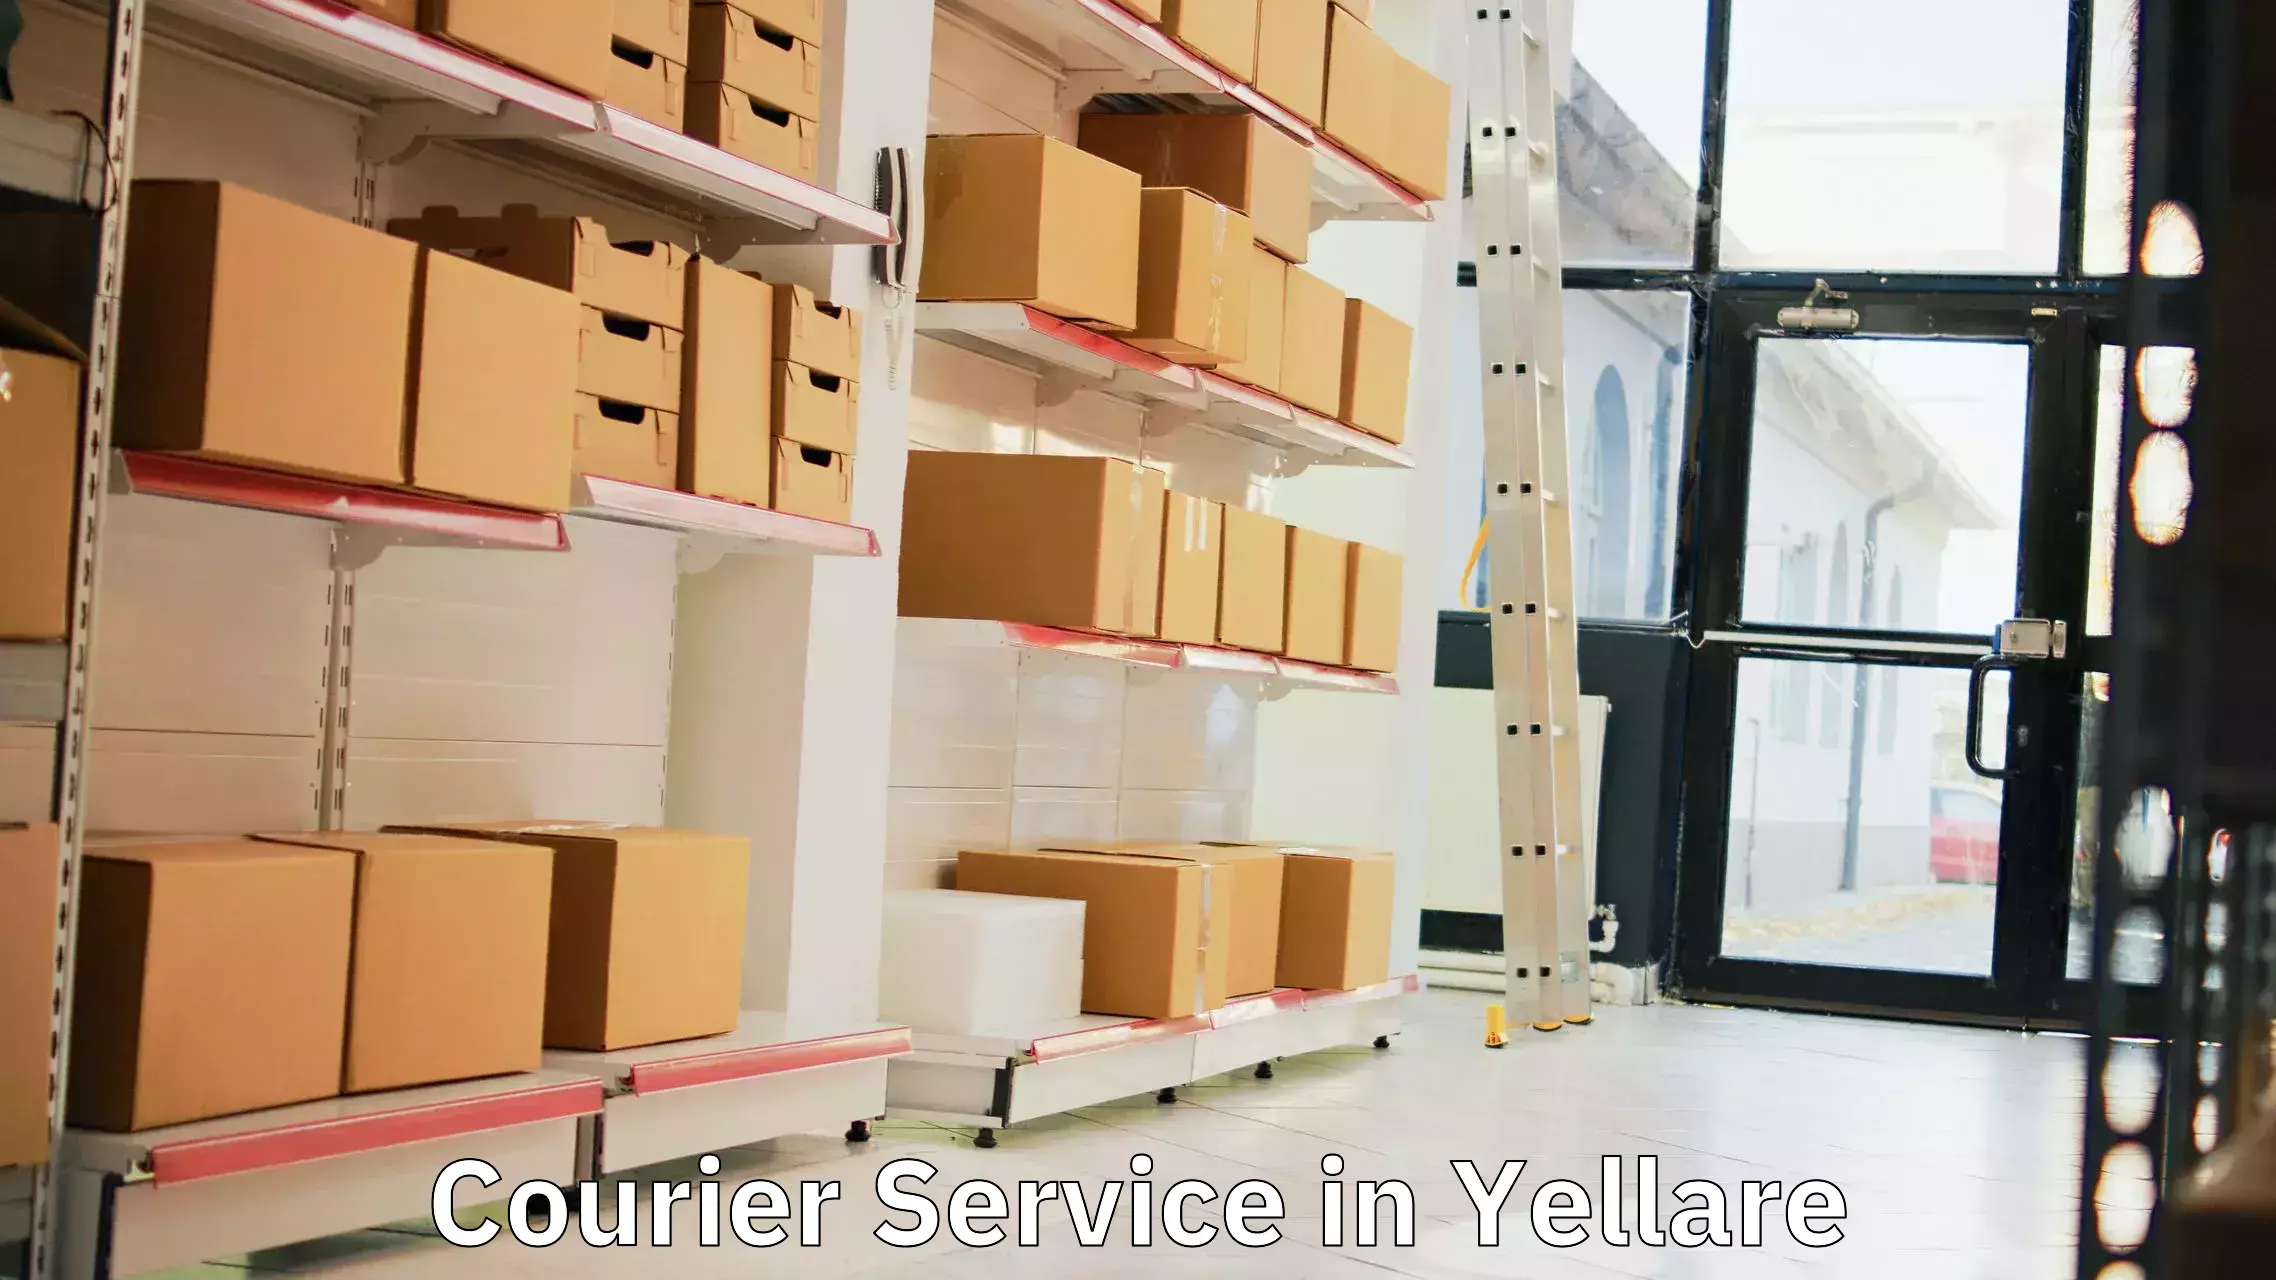 Short distance delivery in Yellare